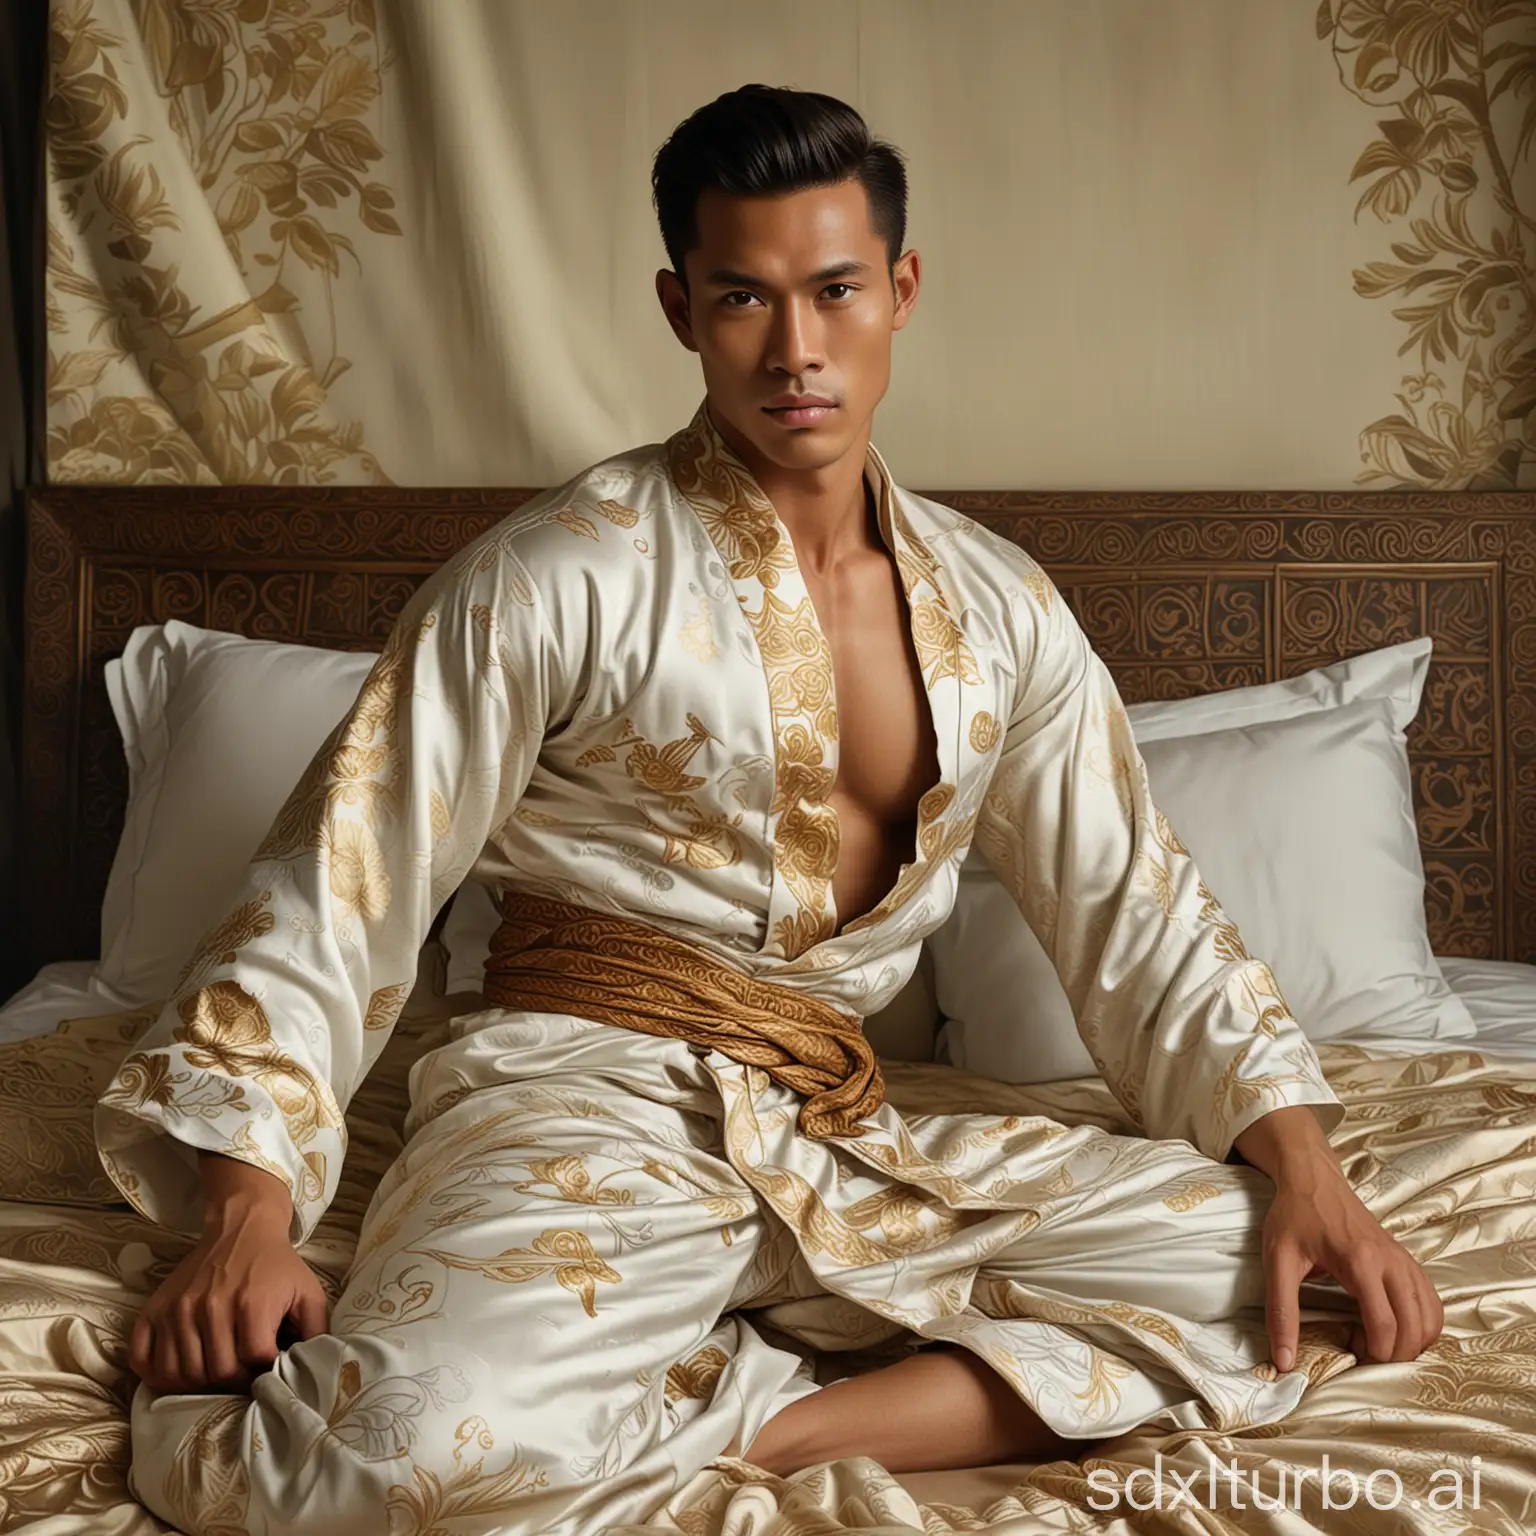 A portrait of a handsome Borneo-Philiphino muscular royalty, in an unbuttoned traditional Javanese robe, posing sensually on the bed in the style of a painting by Leyendecker.